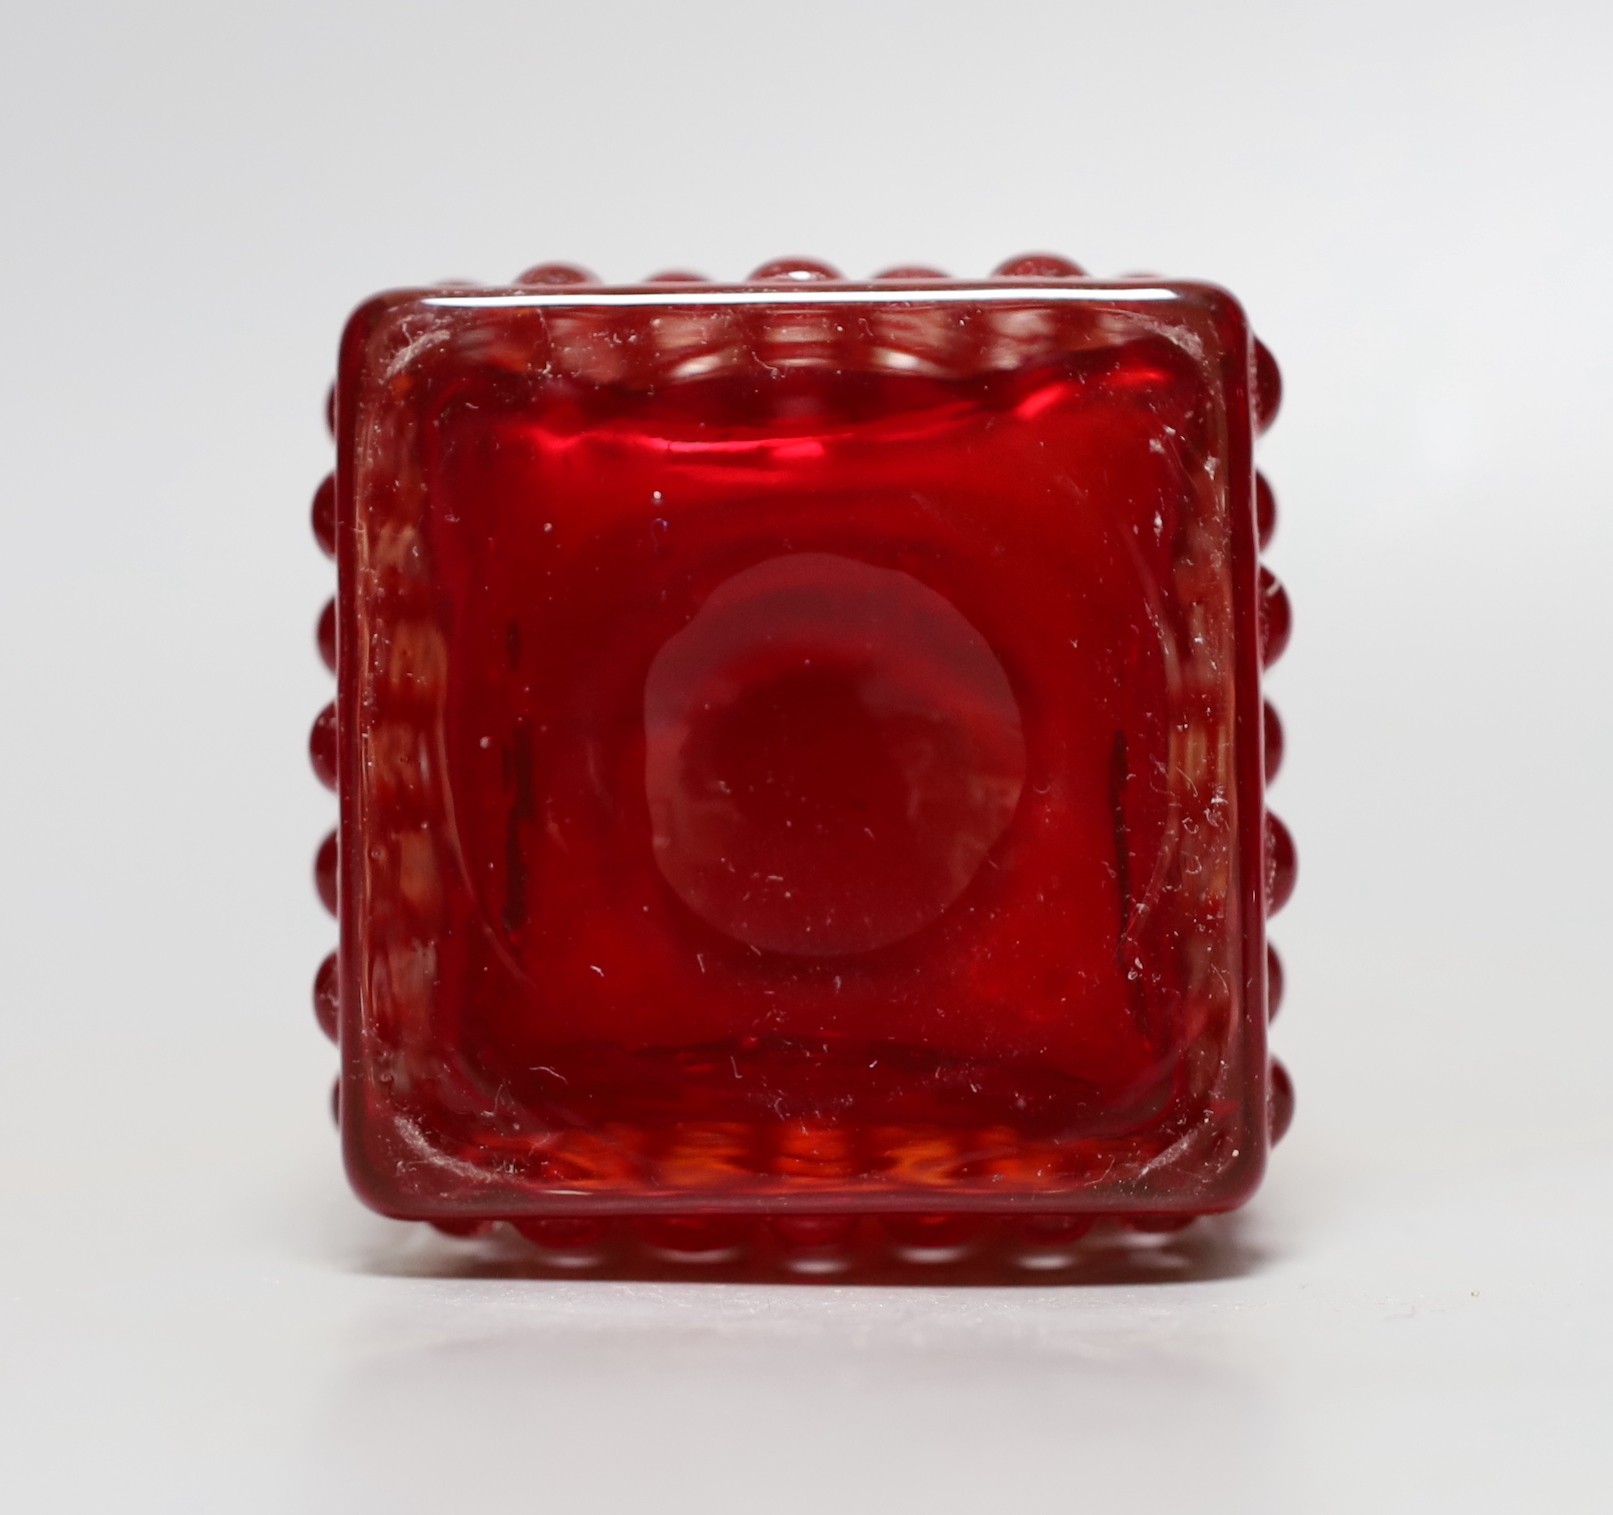 A Whitefriars 'Chess' glass vase, designed by Geoffrey Baxter, pattern number 9817, red glass, 14.5cm tall